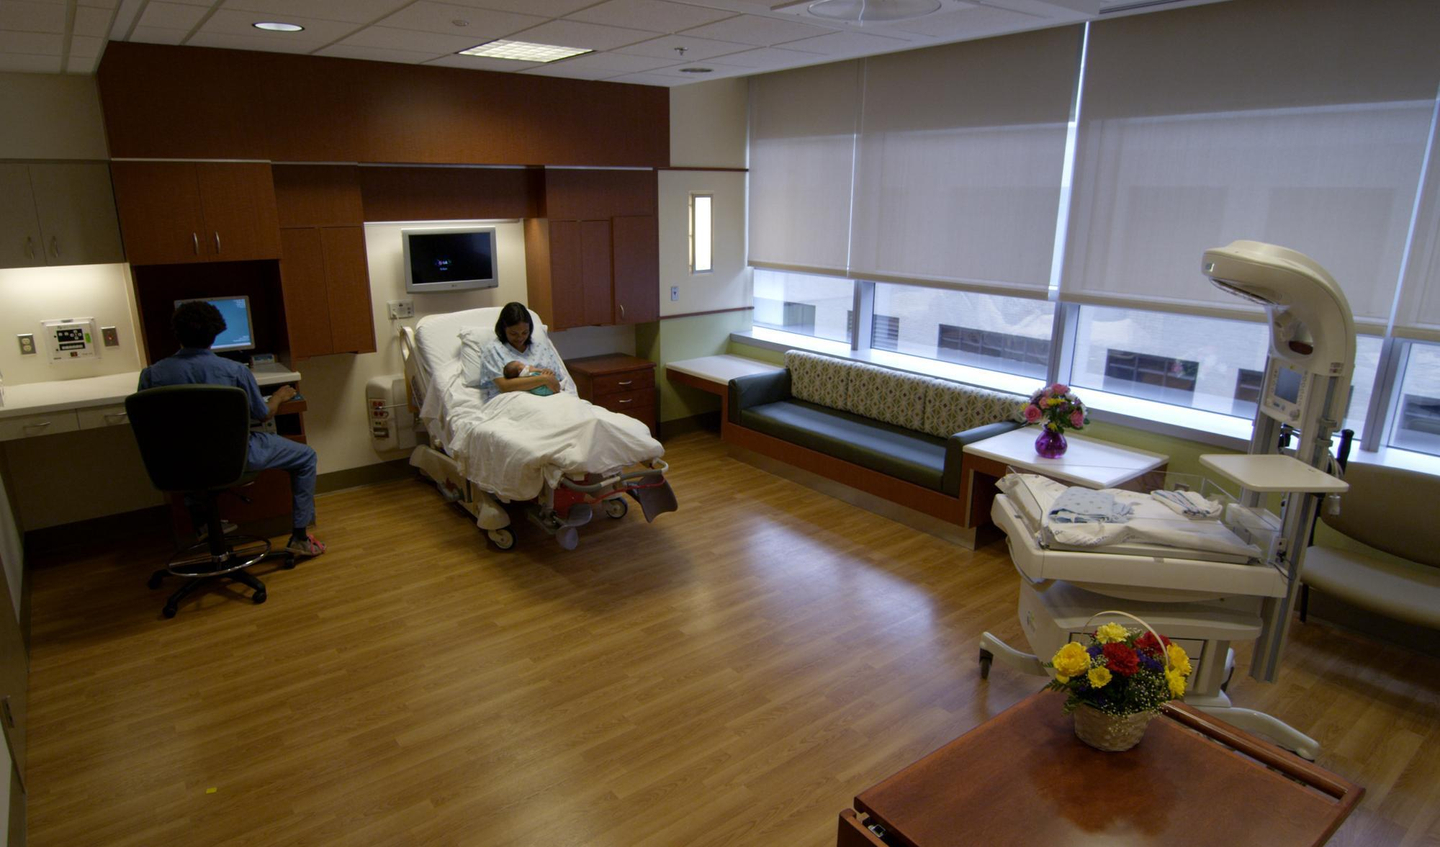 Labor & Delivery Unit Offers Comfort, Private Rooms - Baltimore